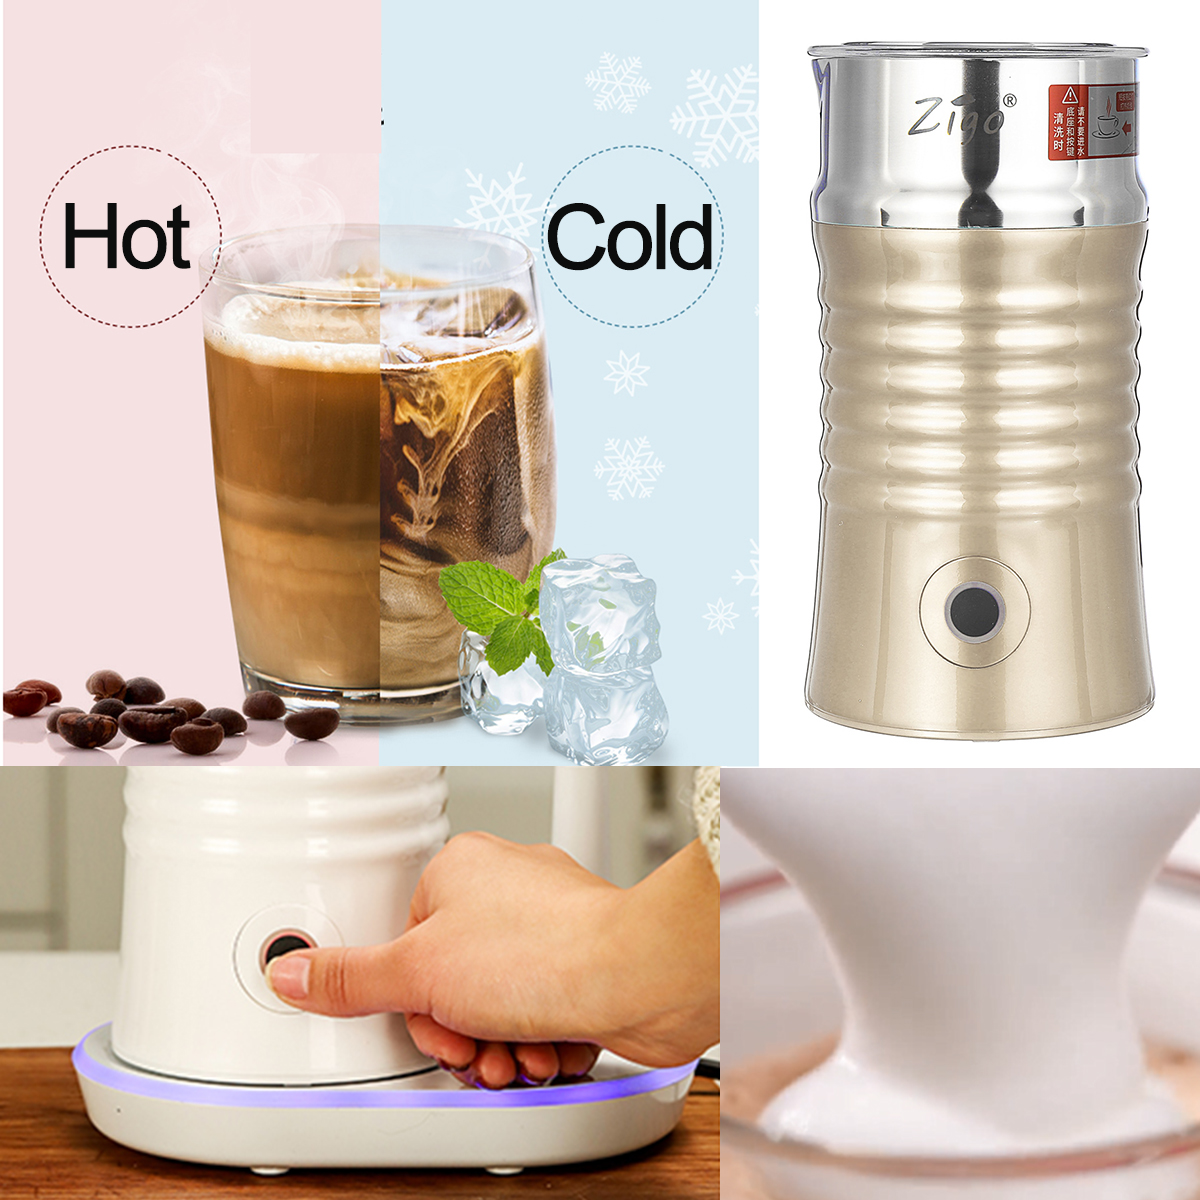 Automatic Electric Milk Frother Warmer Cold Coffee Heater Foam Maker Machine 220V (Gold) 68